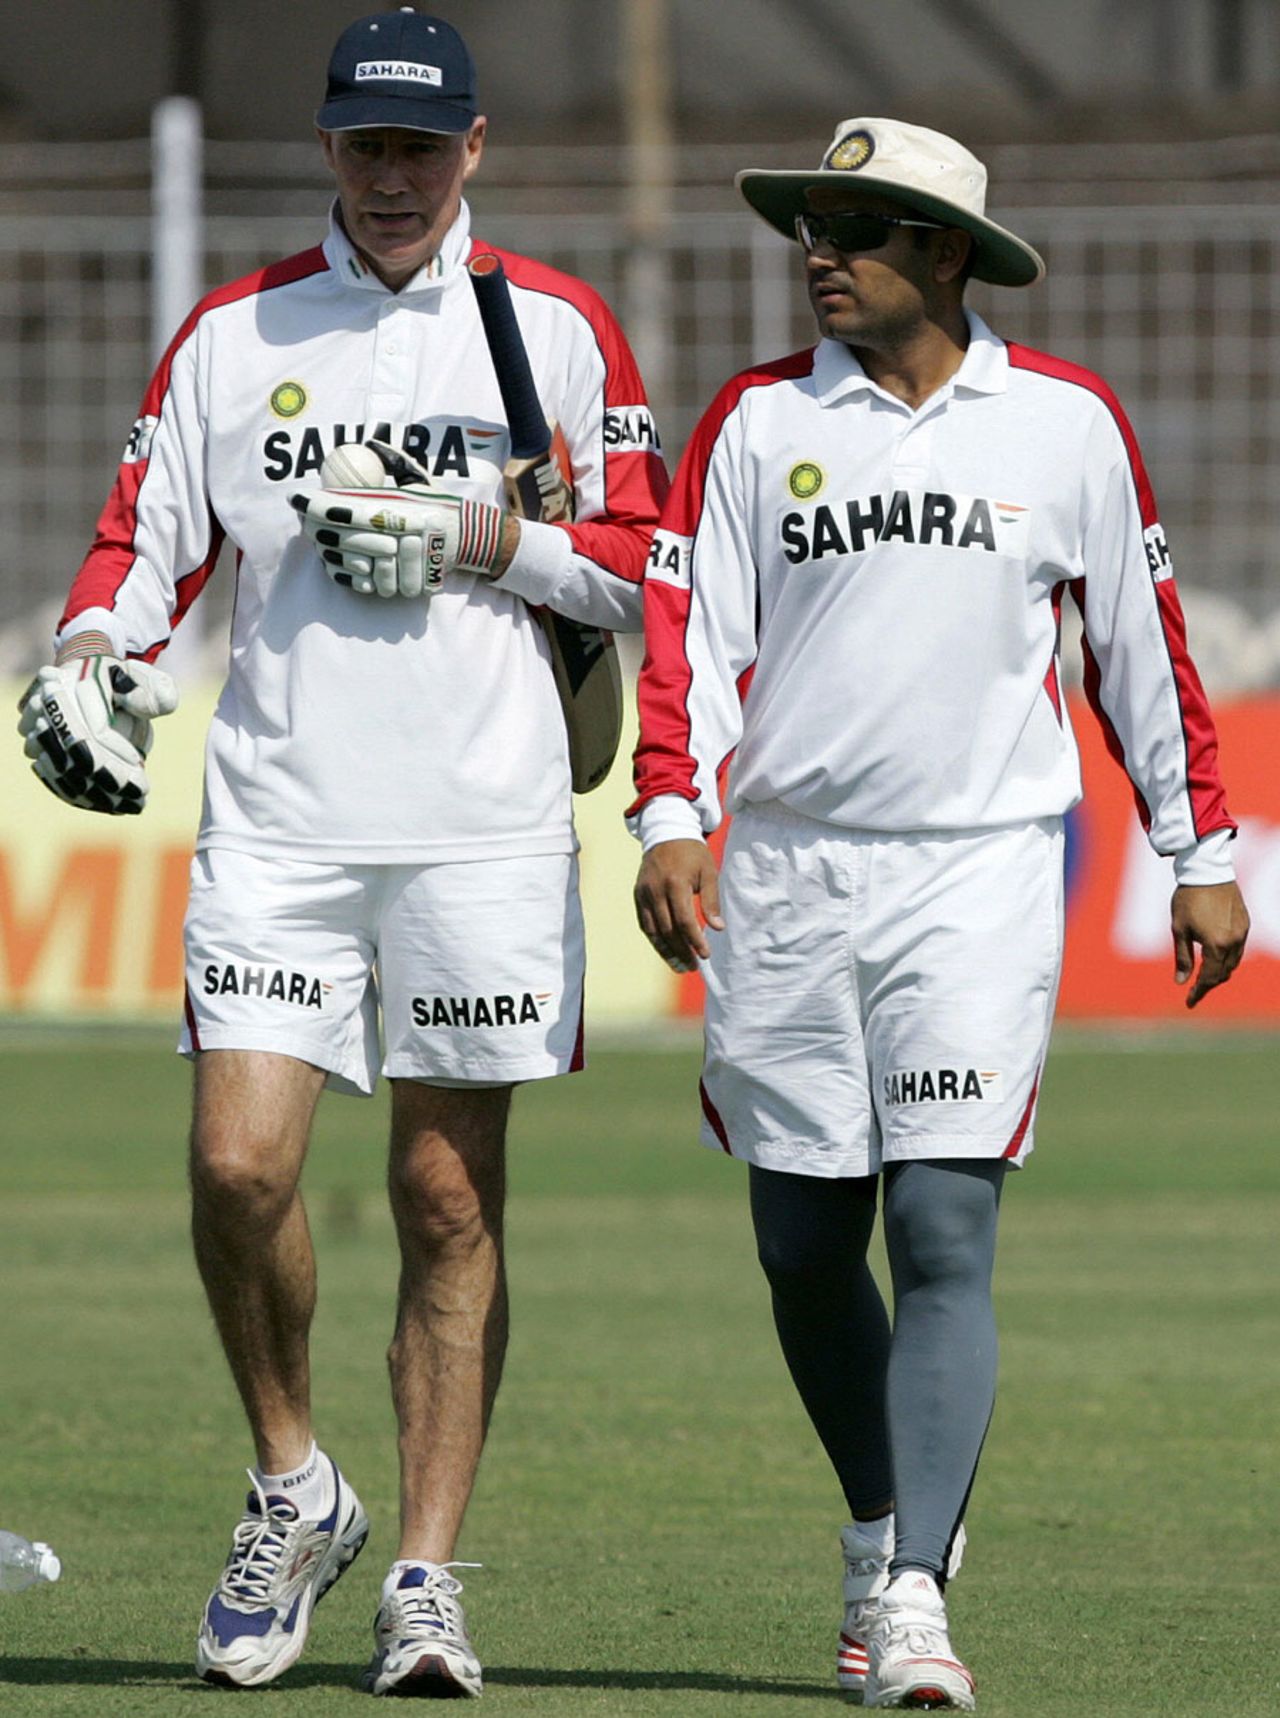 Greg Chappell and Virender Sehwag talk tactics during a practice session on the eve of the 6th ODI against Sri Lanka,  Madhavrao Scindia Cricket Ground, Rajkot, November 8, 2005